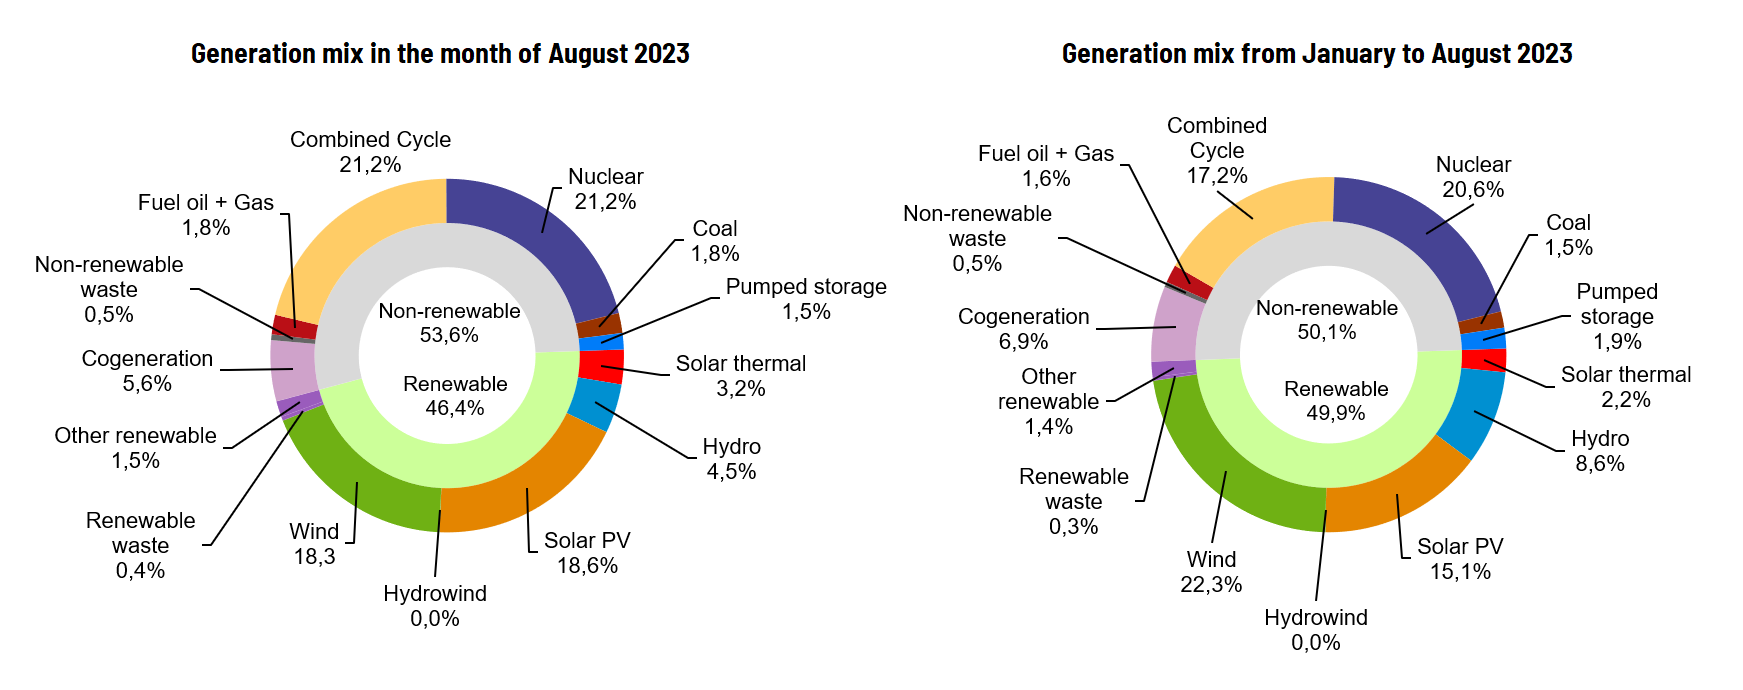 Generation mix in the month of August 2023